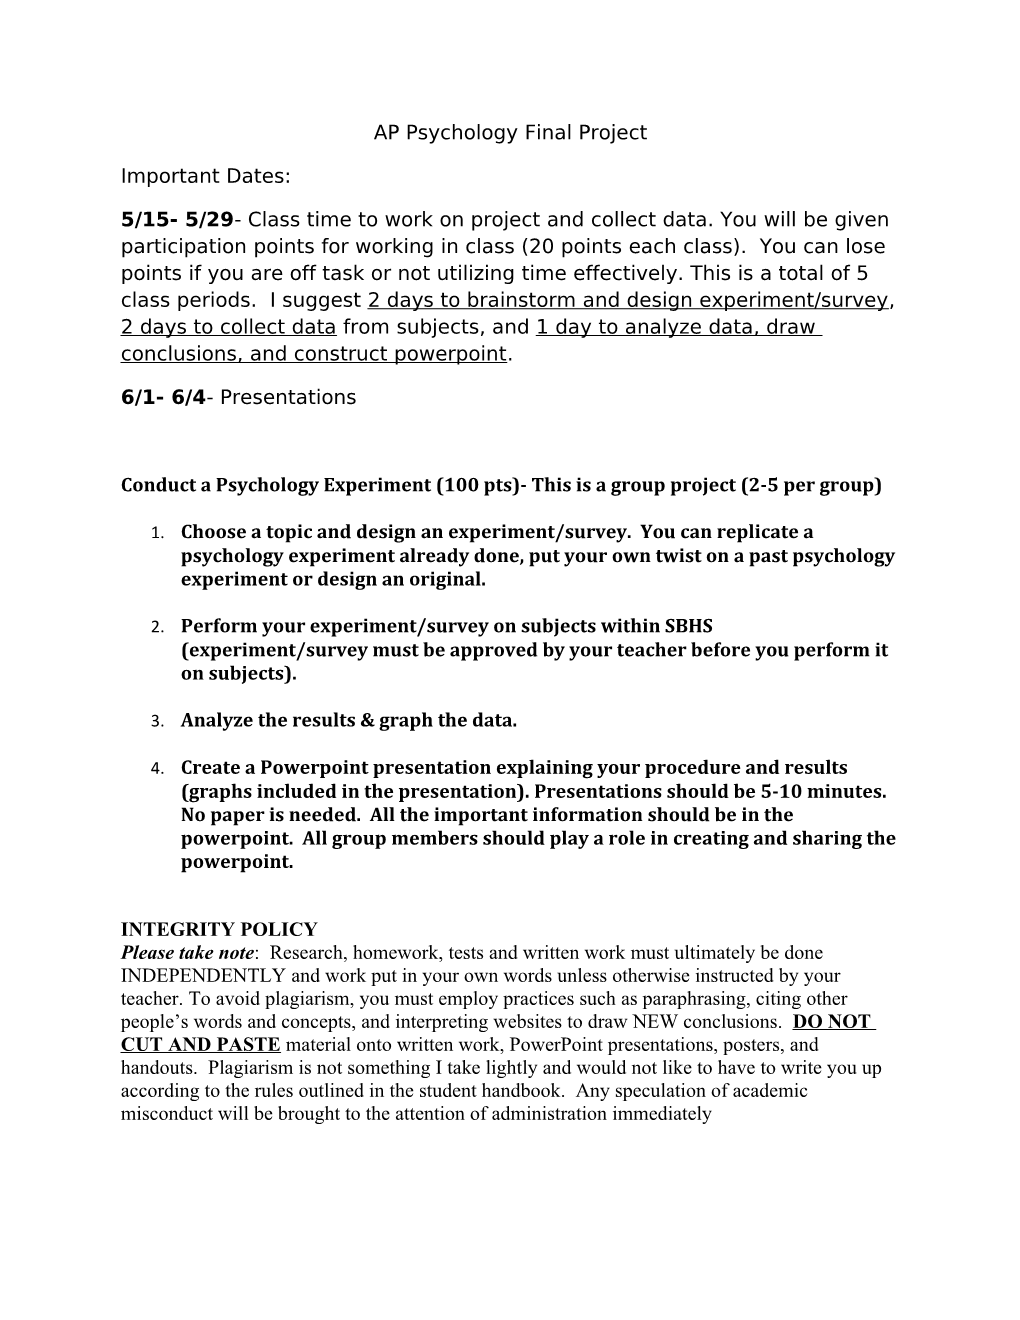 Conduct a Psychology Experiment (100 Pts)- This Is a Group Project (2-5 Per Group)